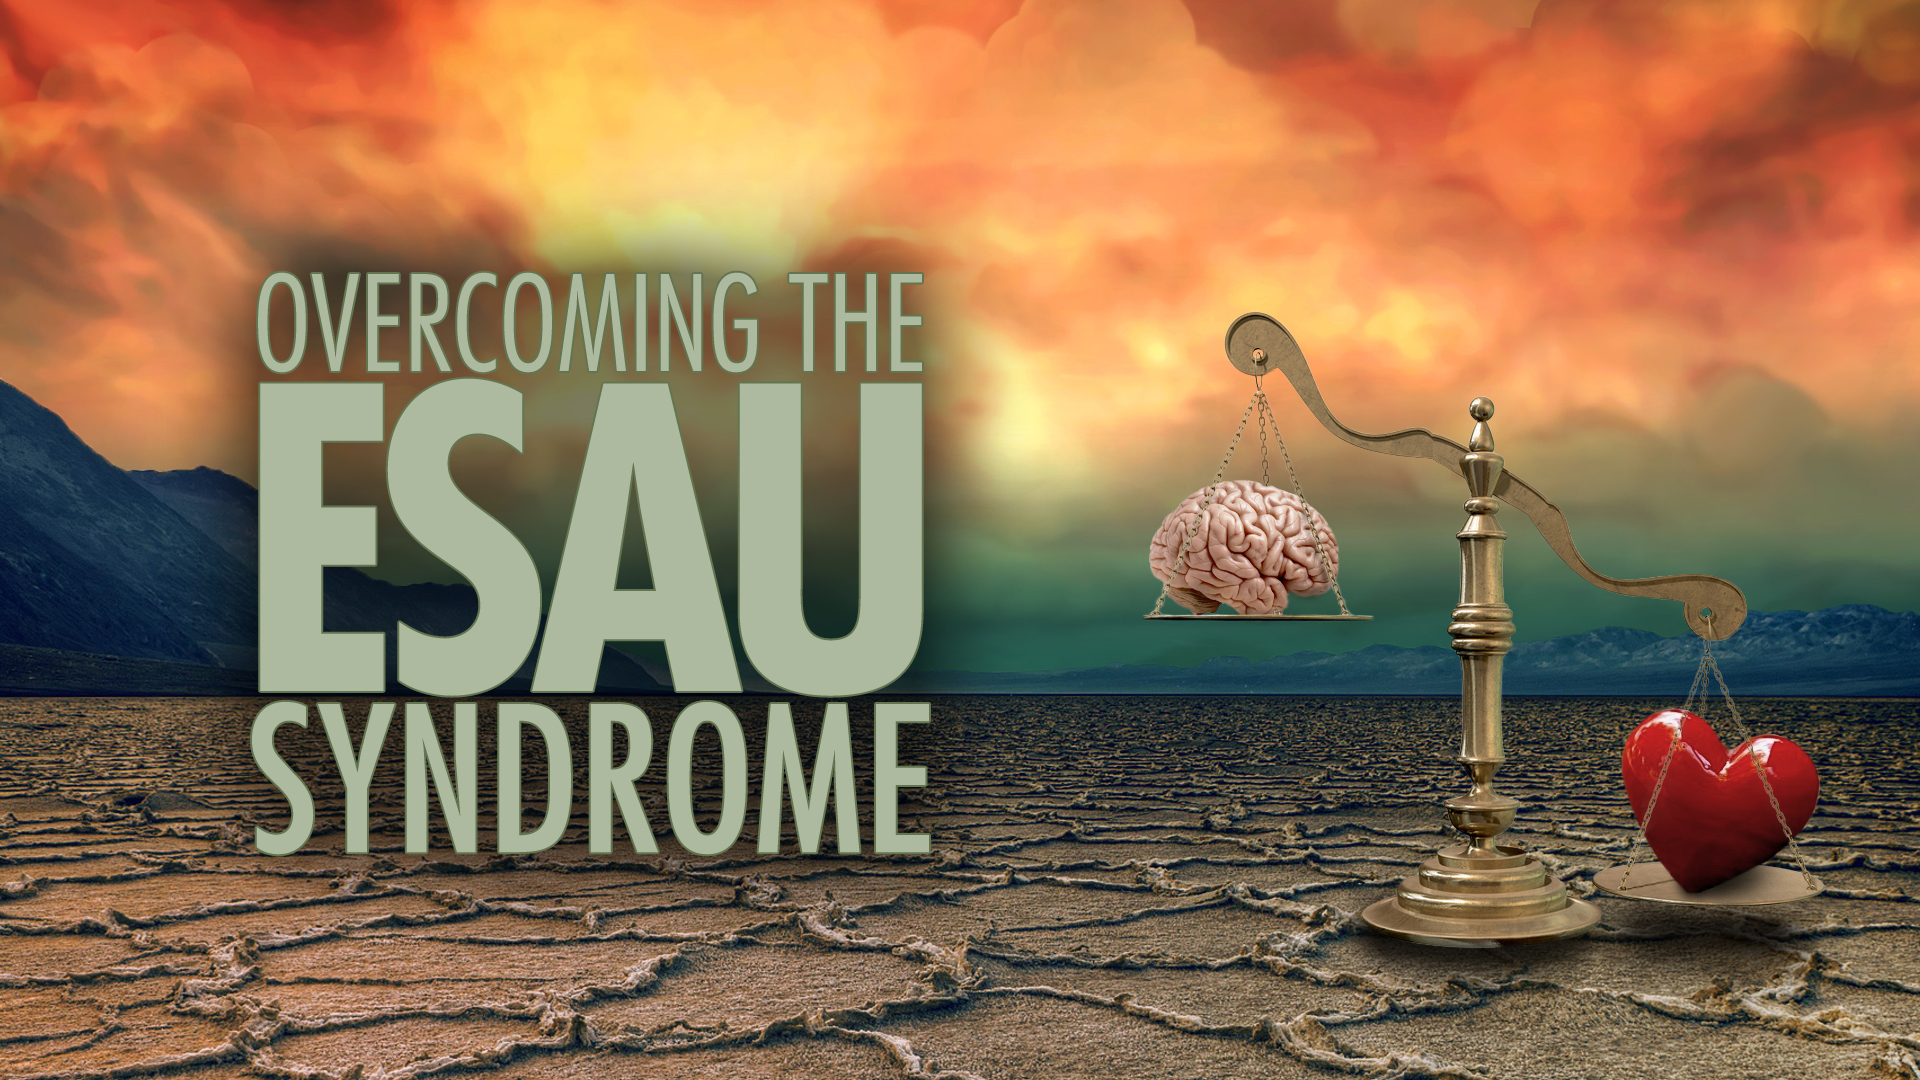 Overcoming The Esau Syndrome